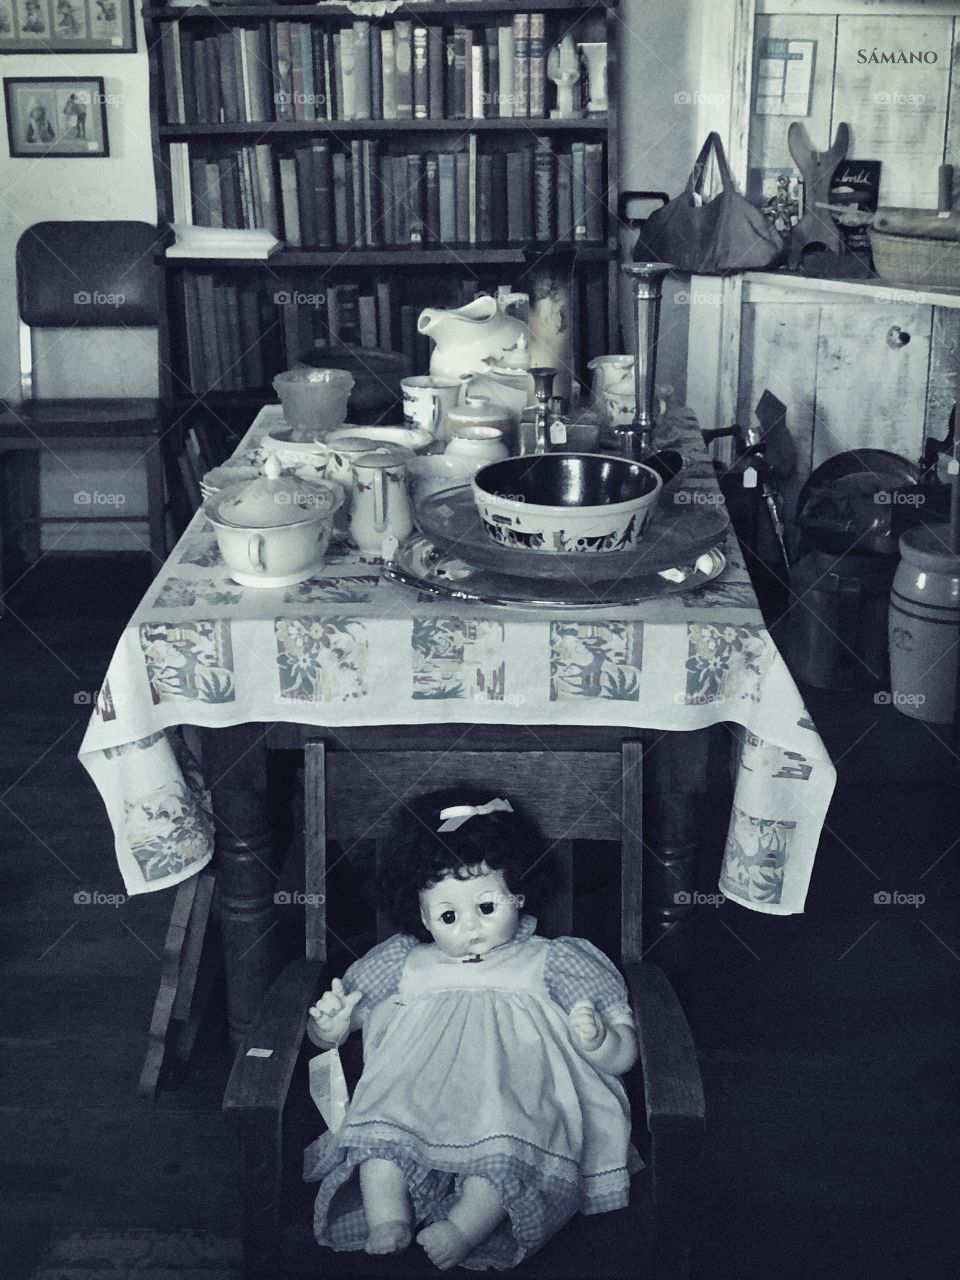 “Doll in an old kitchen” ~This is located in historic San Juan Bautista. This doll sits in the chair looking straight out the window for any passers by to see; kind of creepy but cool. #HistoricTown #OldHouse #Doll #Kitchen #SJB #CA 